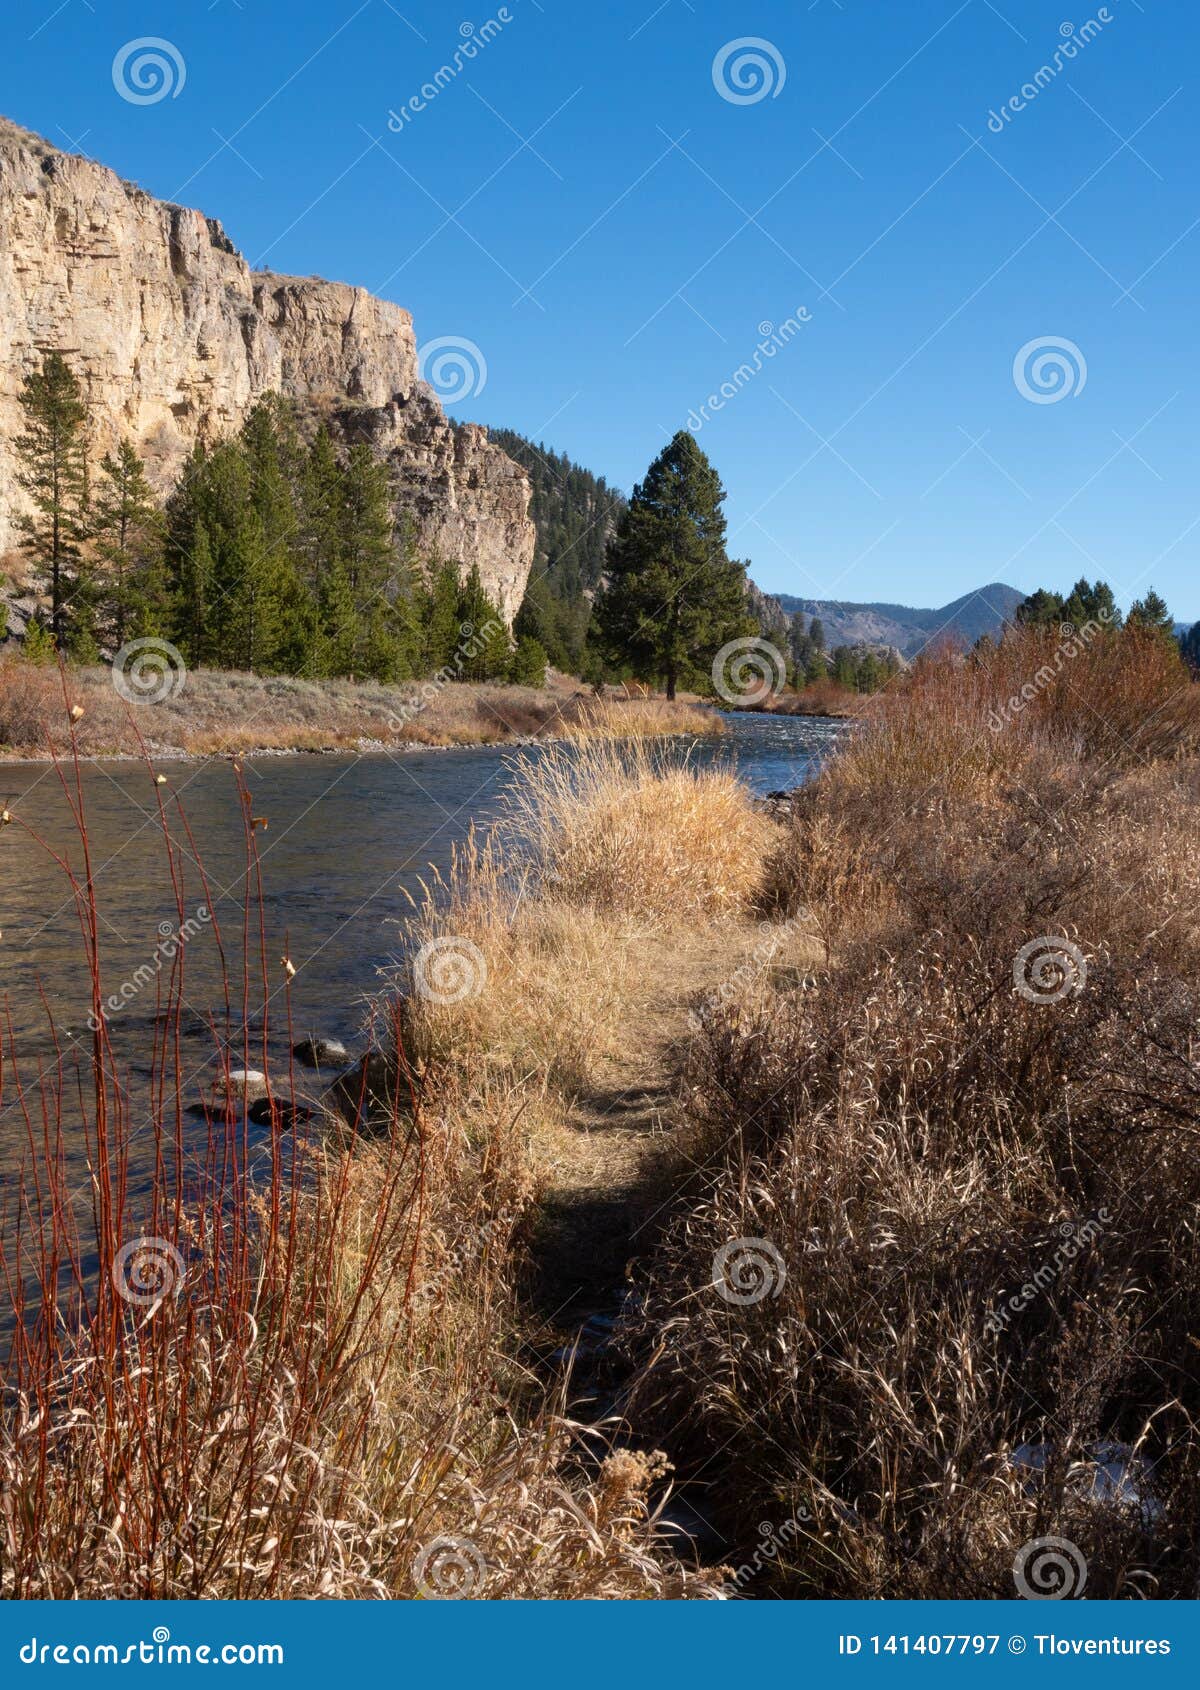 gallatin river flowing past yellowstone cliffs